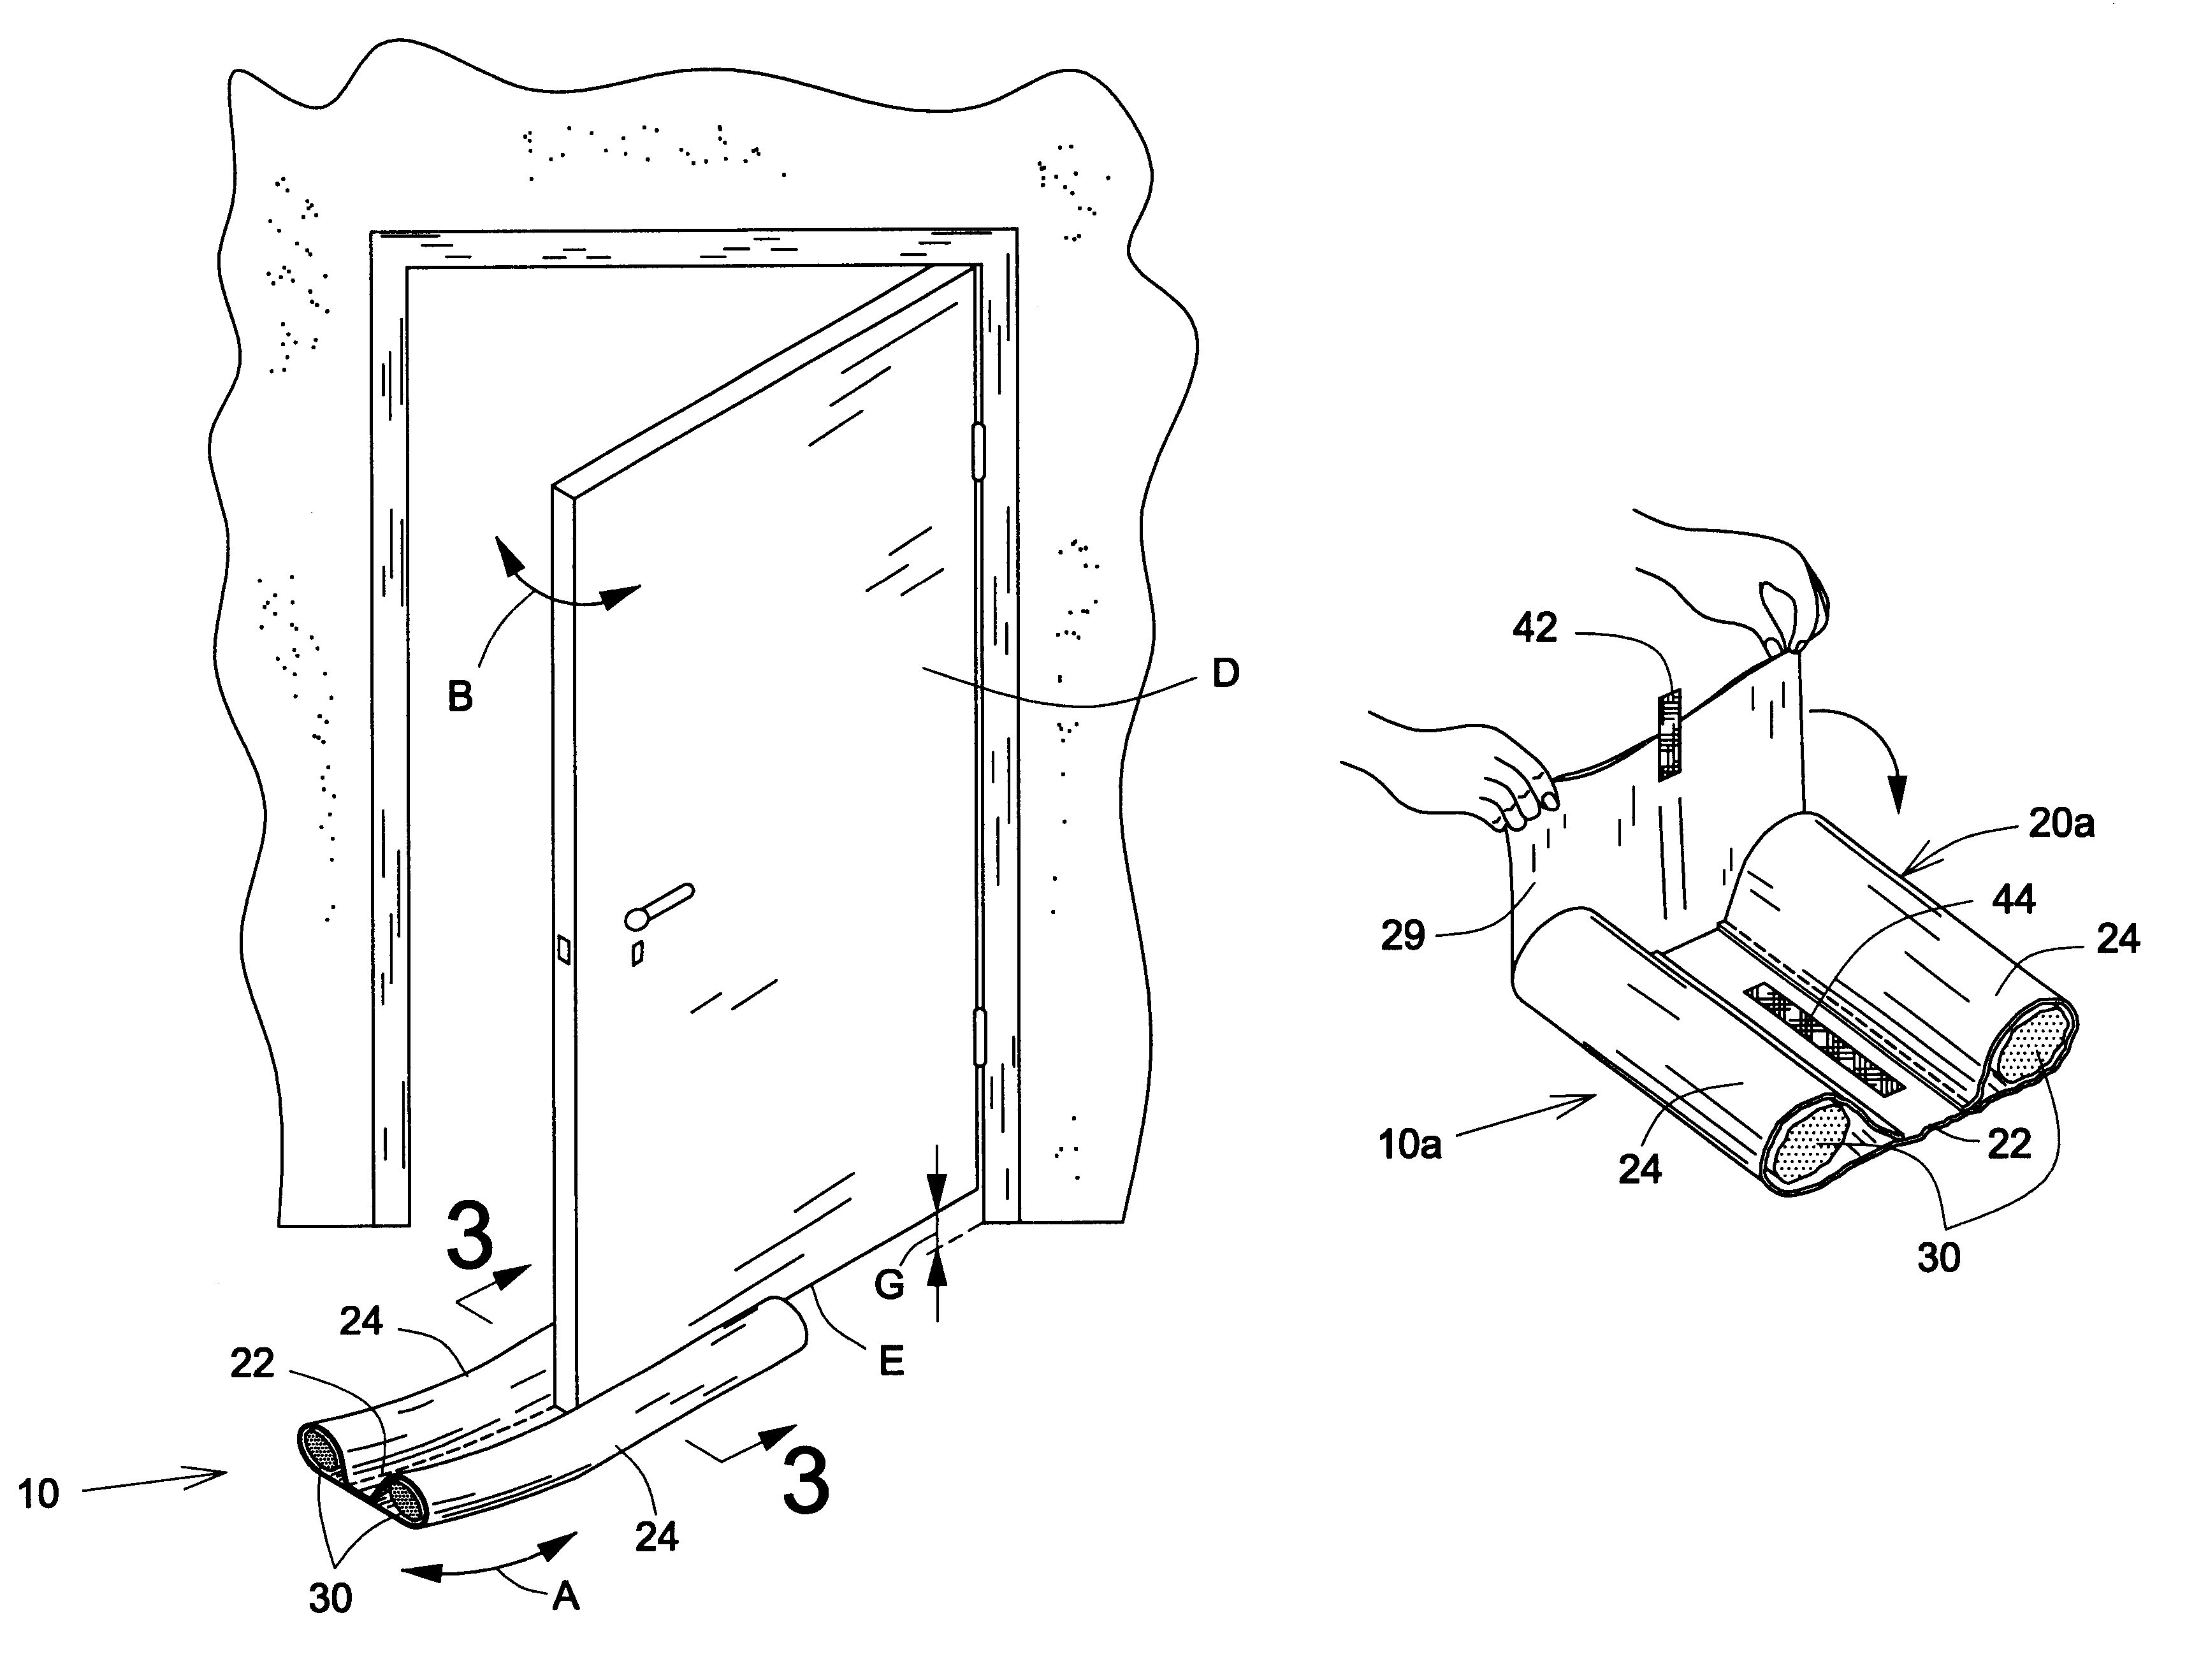 Removable draft excluder having a foldable closing end